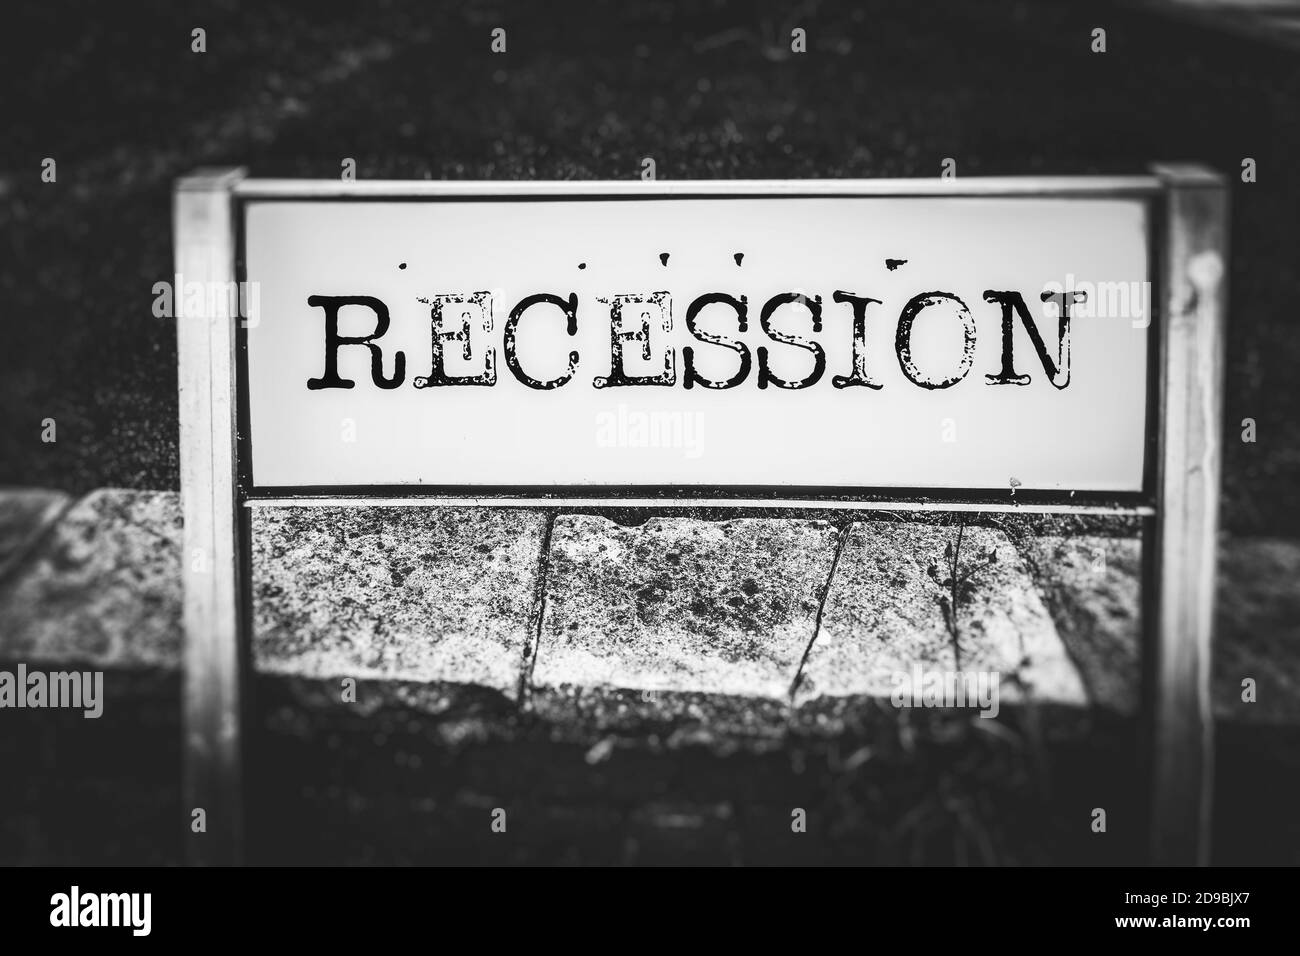 Recession on a road sign Stock Photo